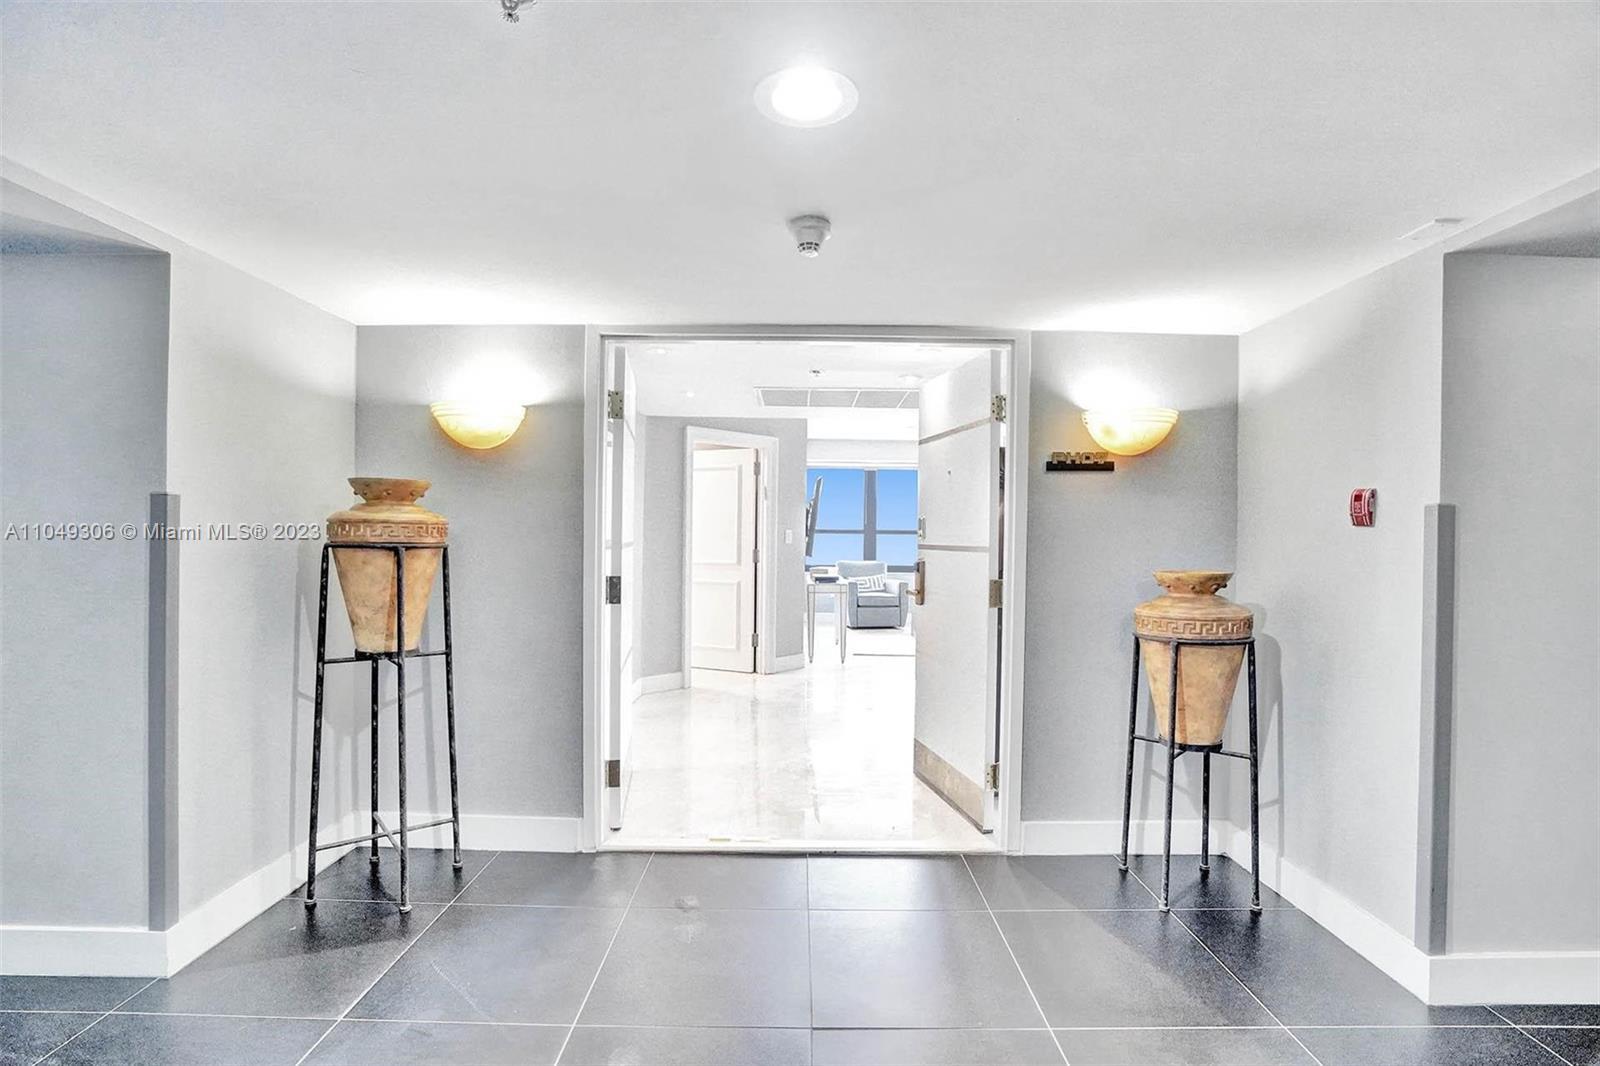 Double doors open into this bright, remodeled & furnished 3BD/3BA penthouse apartment with large bal